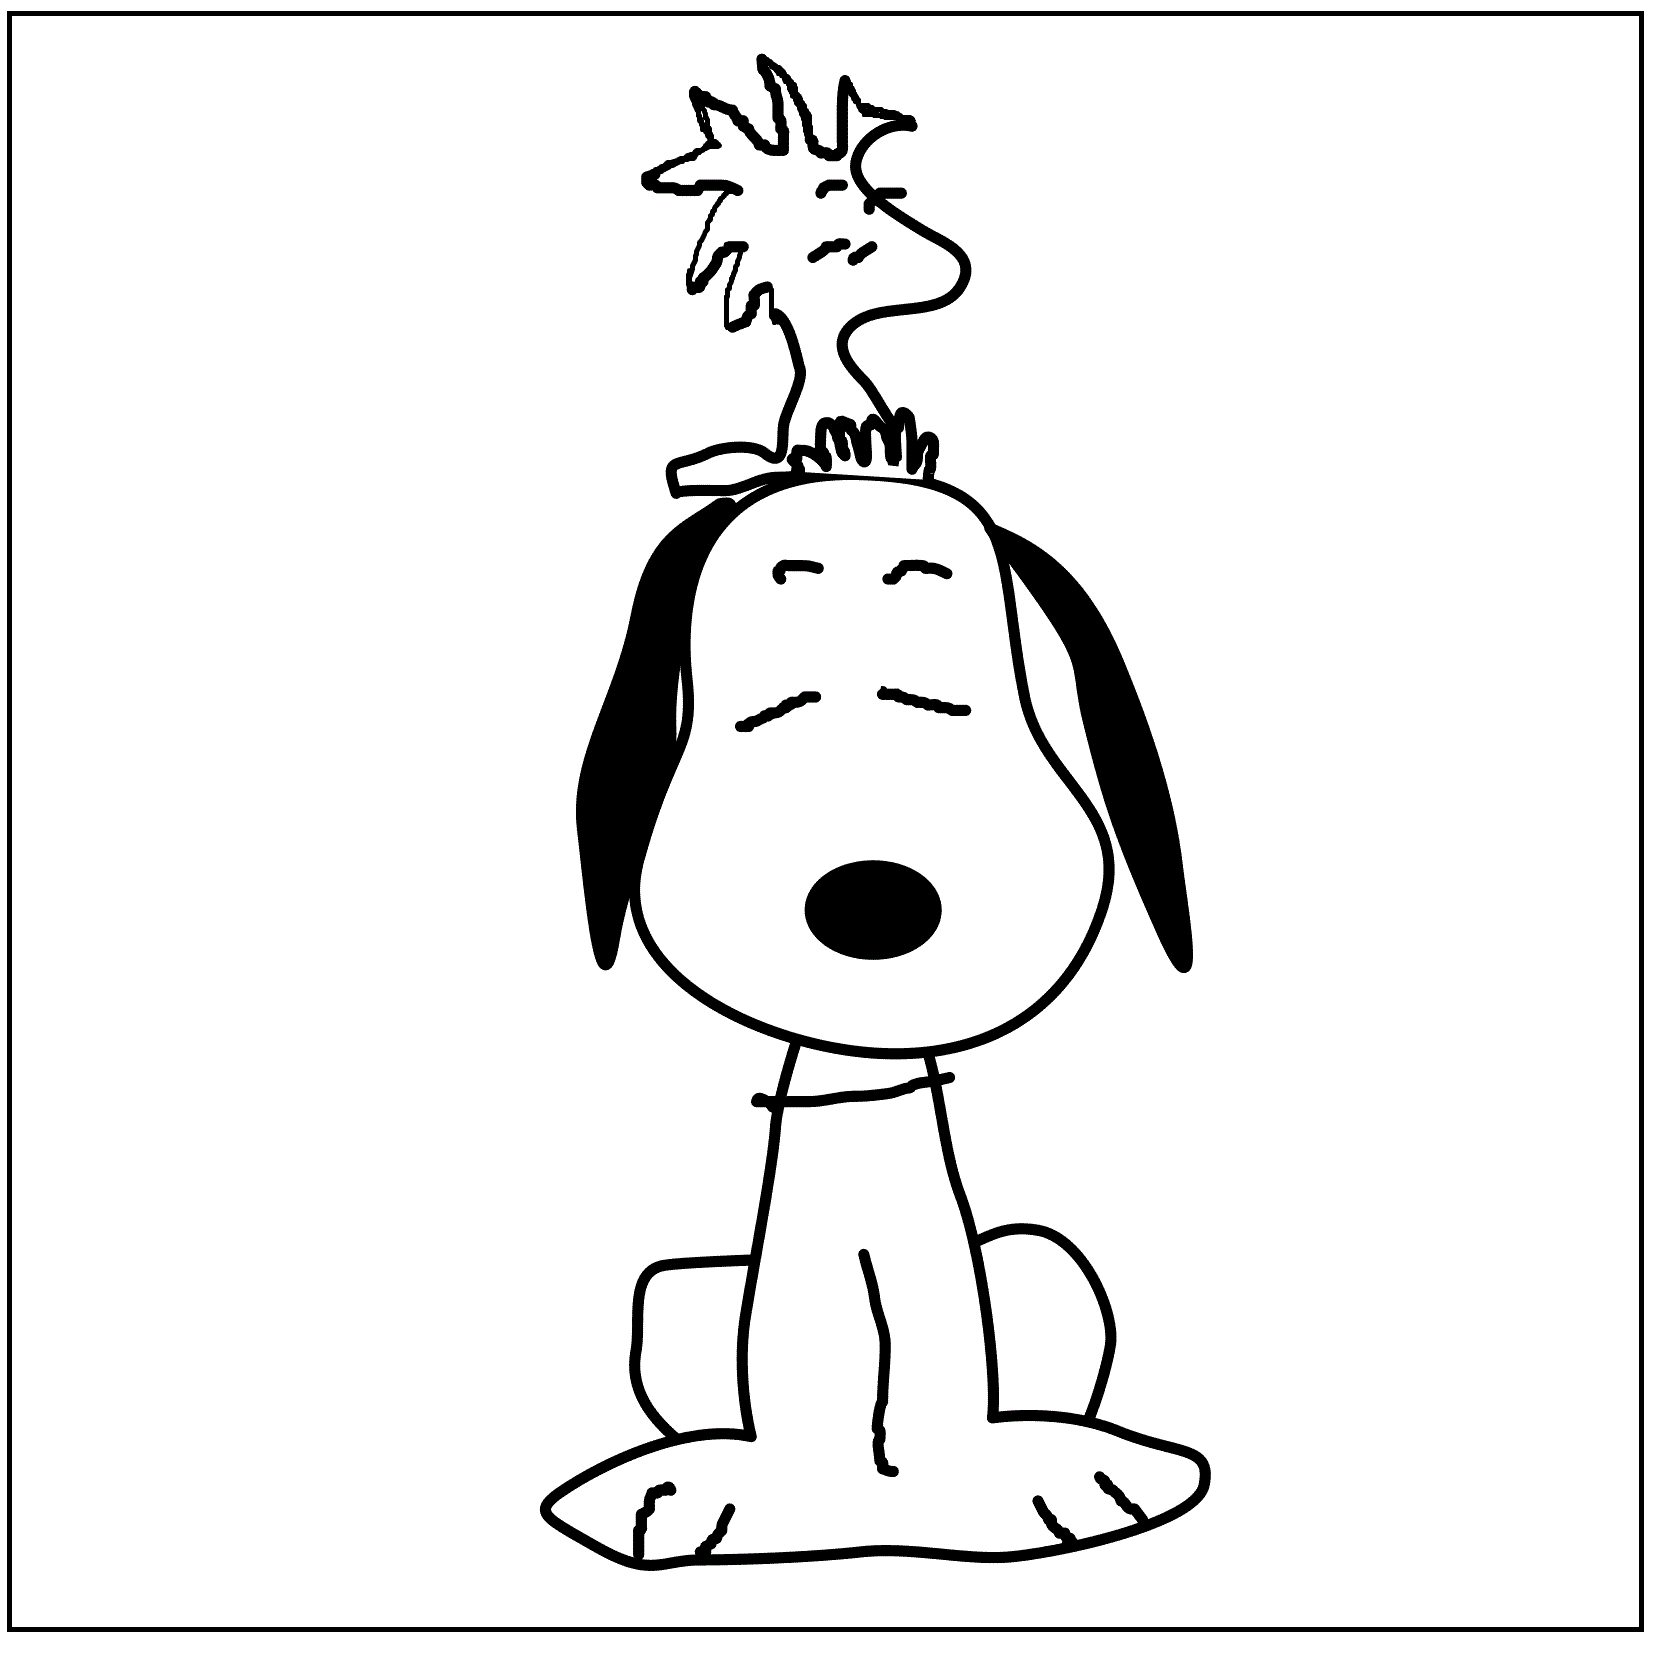 Woodstock On Snoopy Head Coloring Pages For Kids #fzm : Printable ...